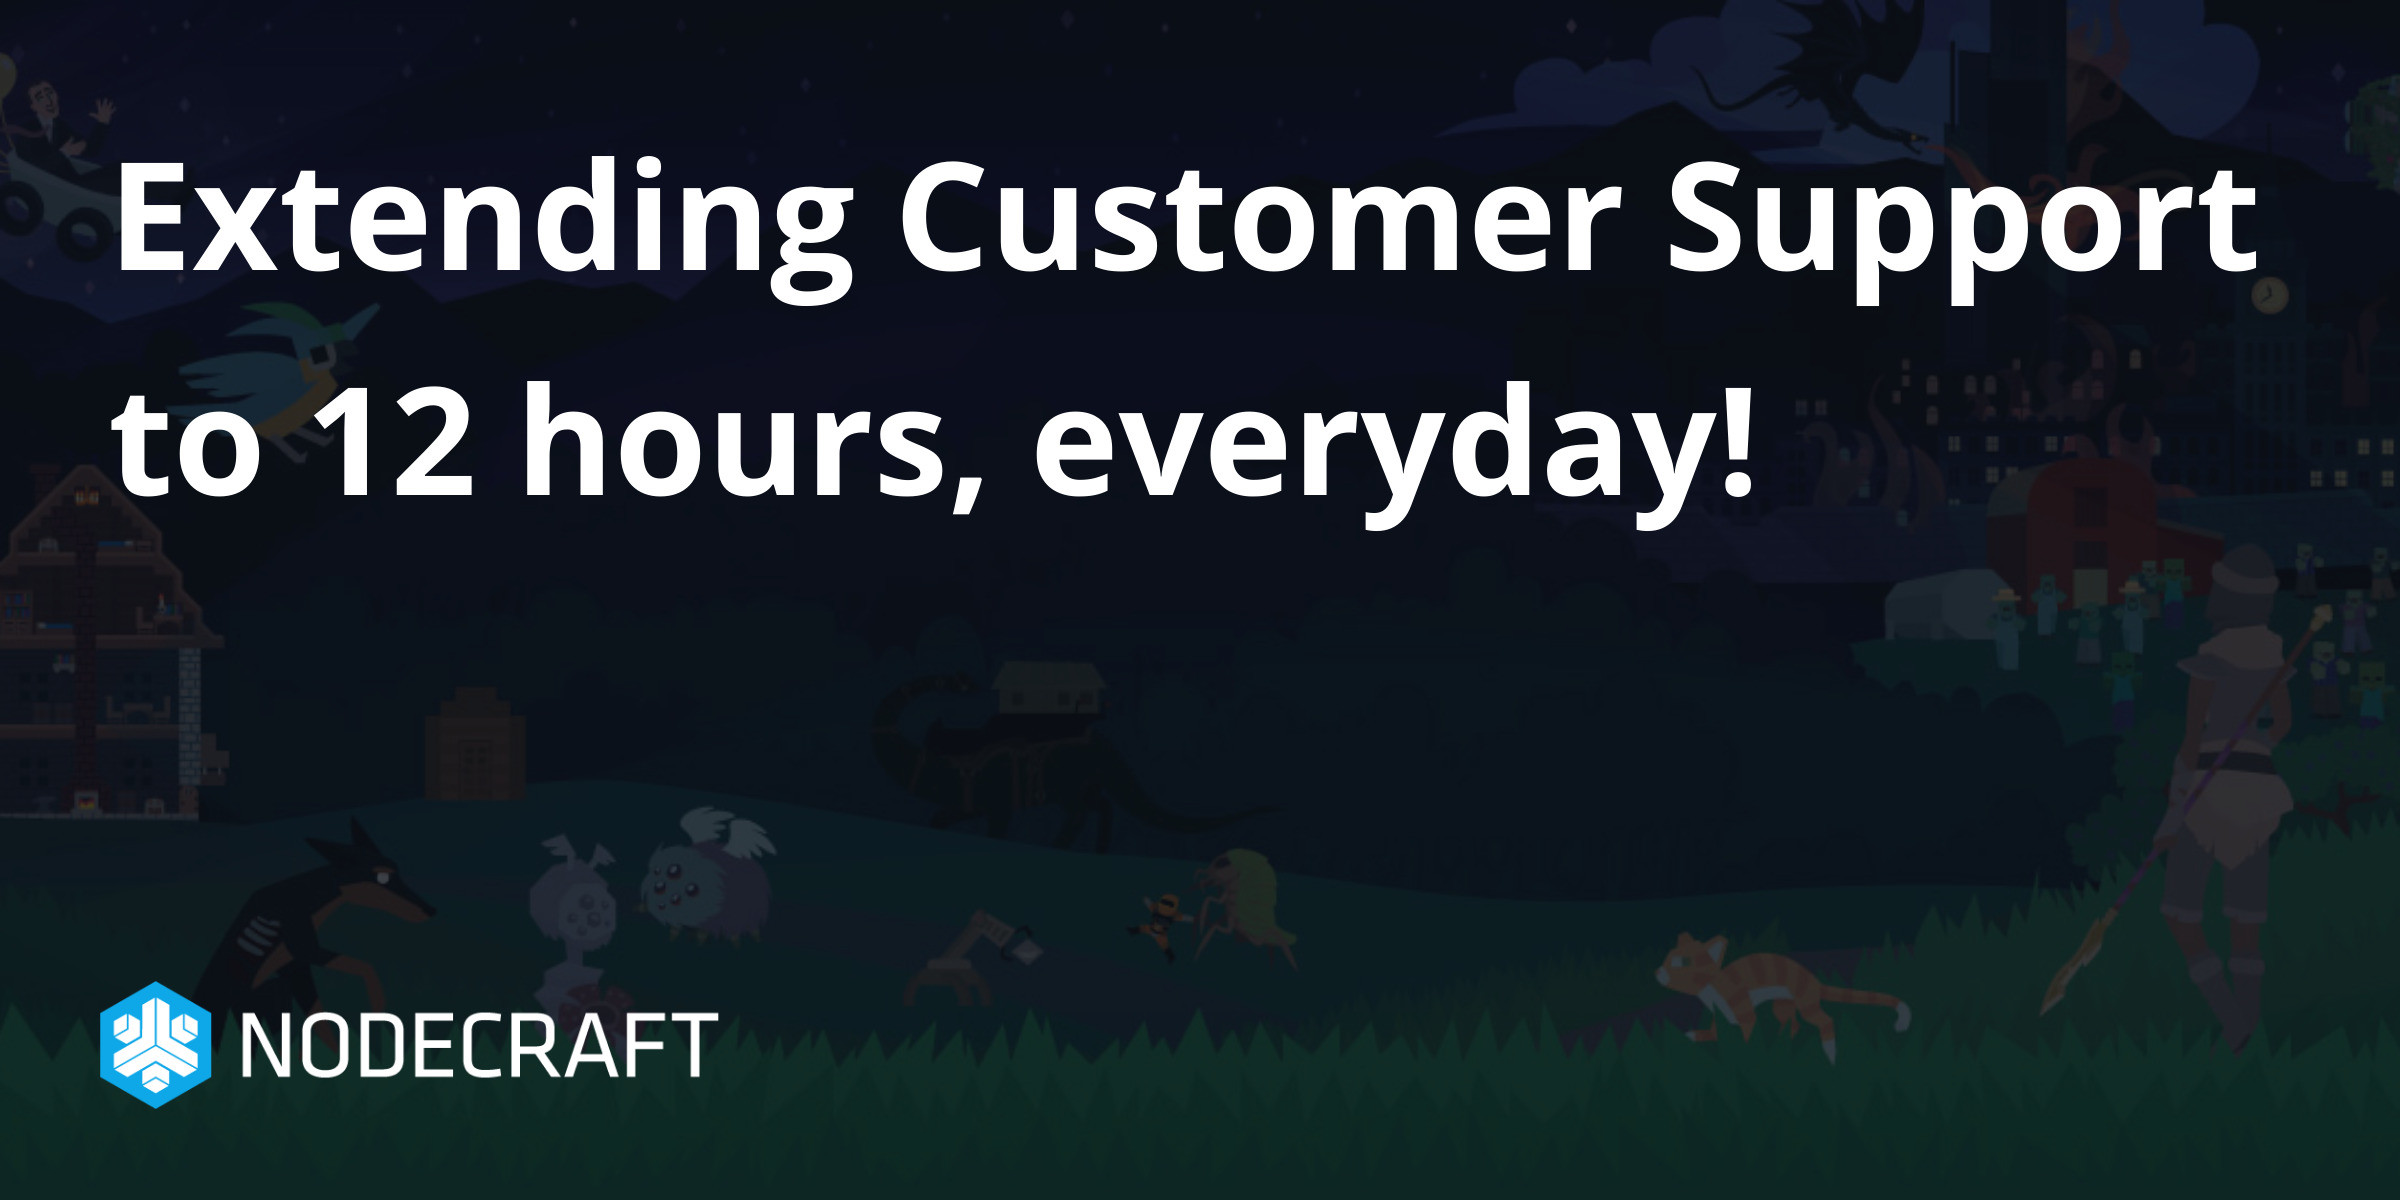 Extending Customer Support to 12 hours, everyday!